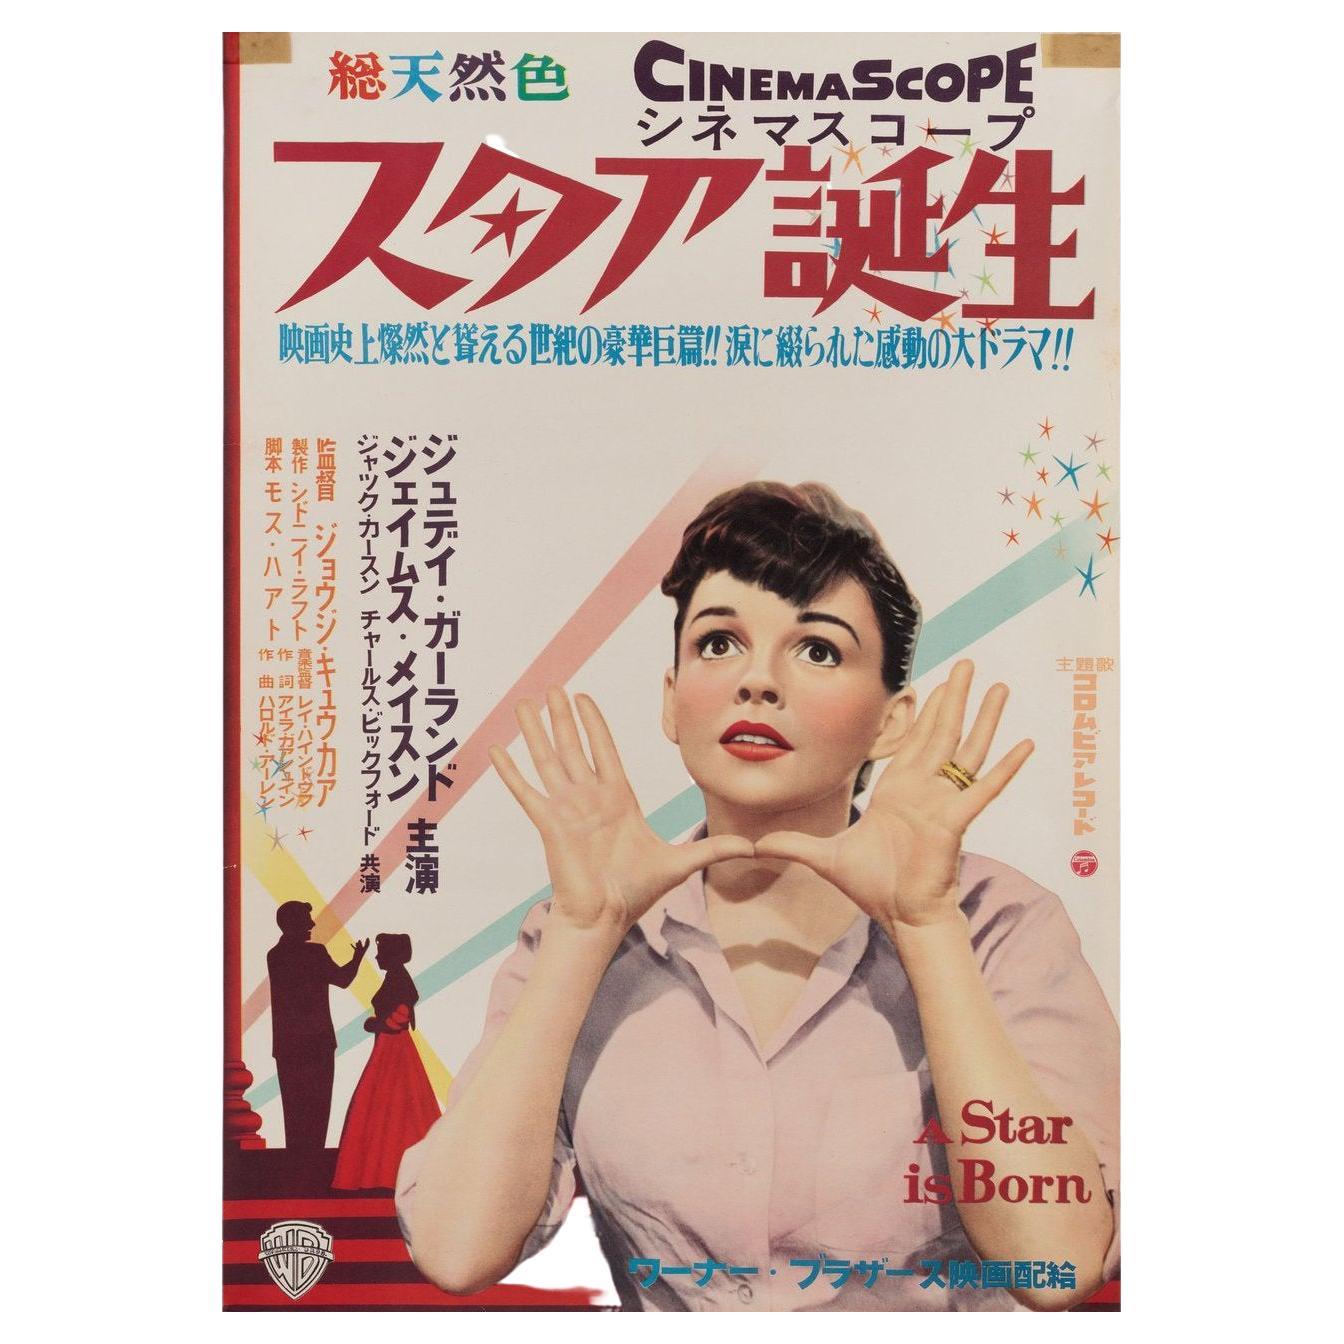 A Star Is Born 1954 Japanese B2 Film Poster